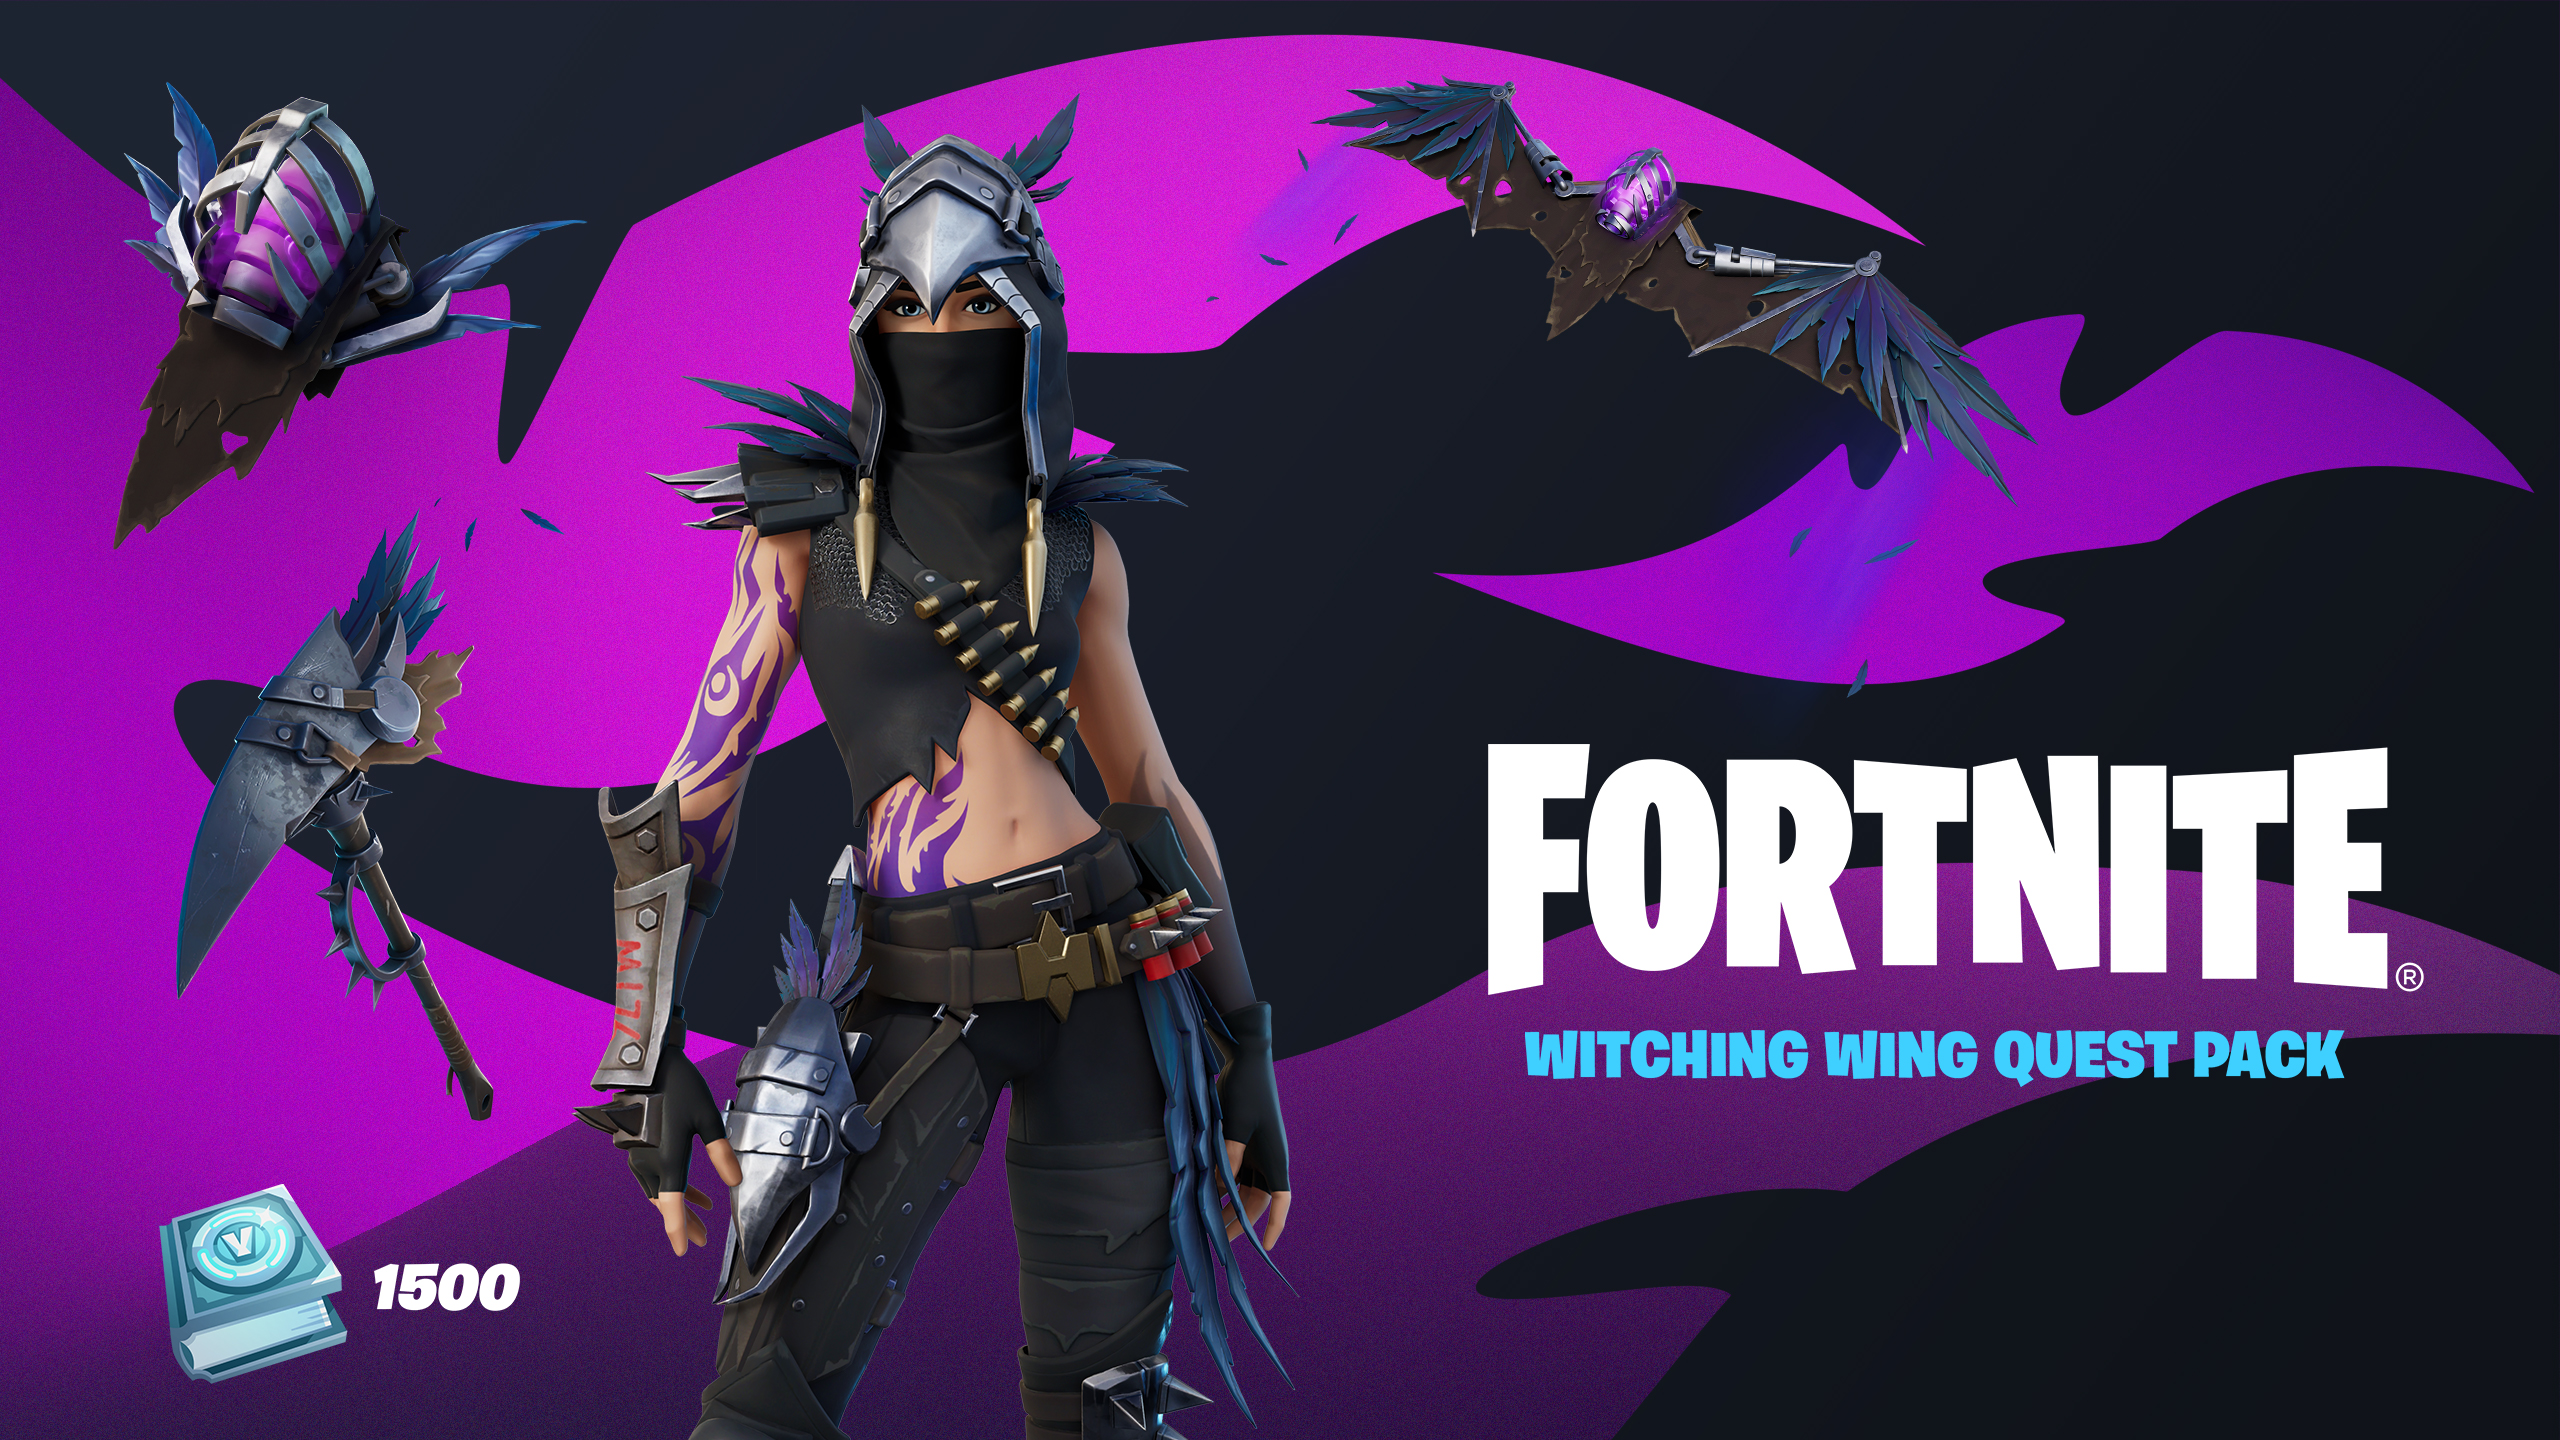 Fortnite - Witching Wing Quest Pack EU XBOX One / Xbox Series X|S CD Key 154.8 $